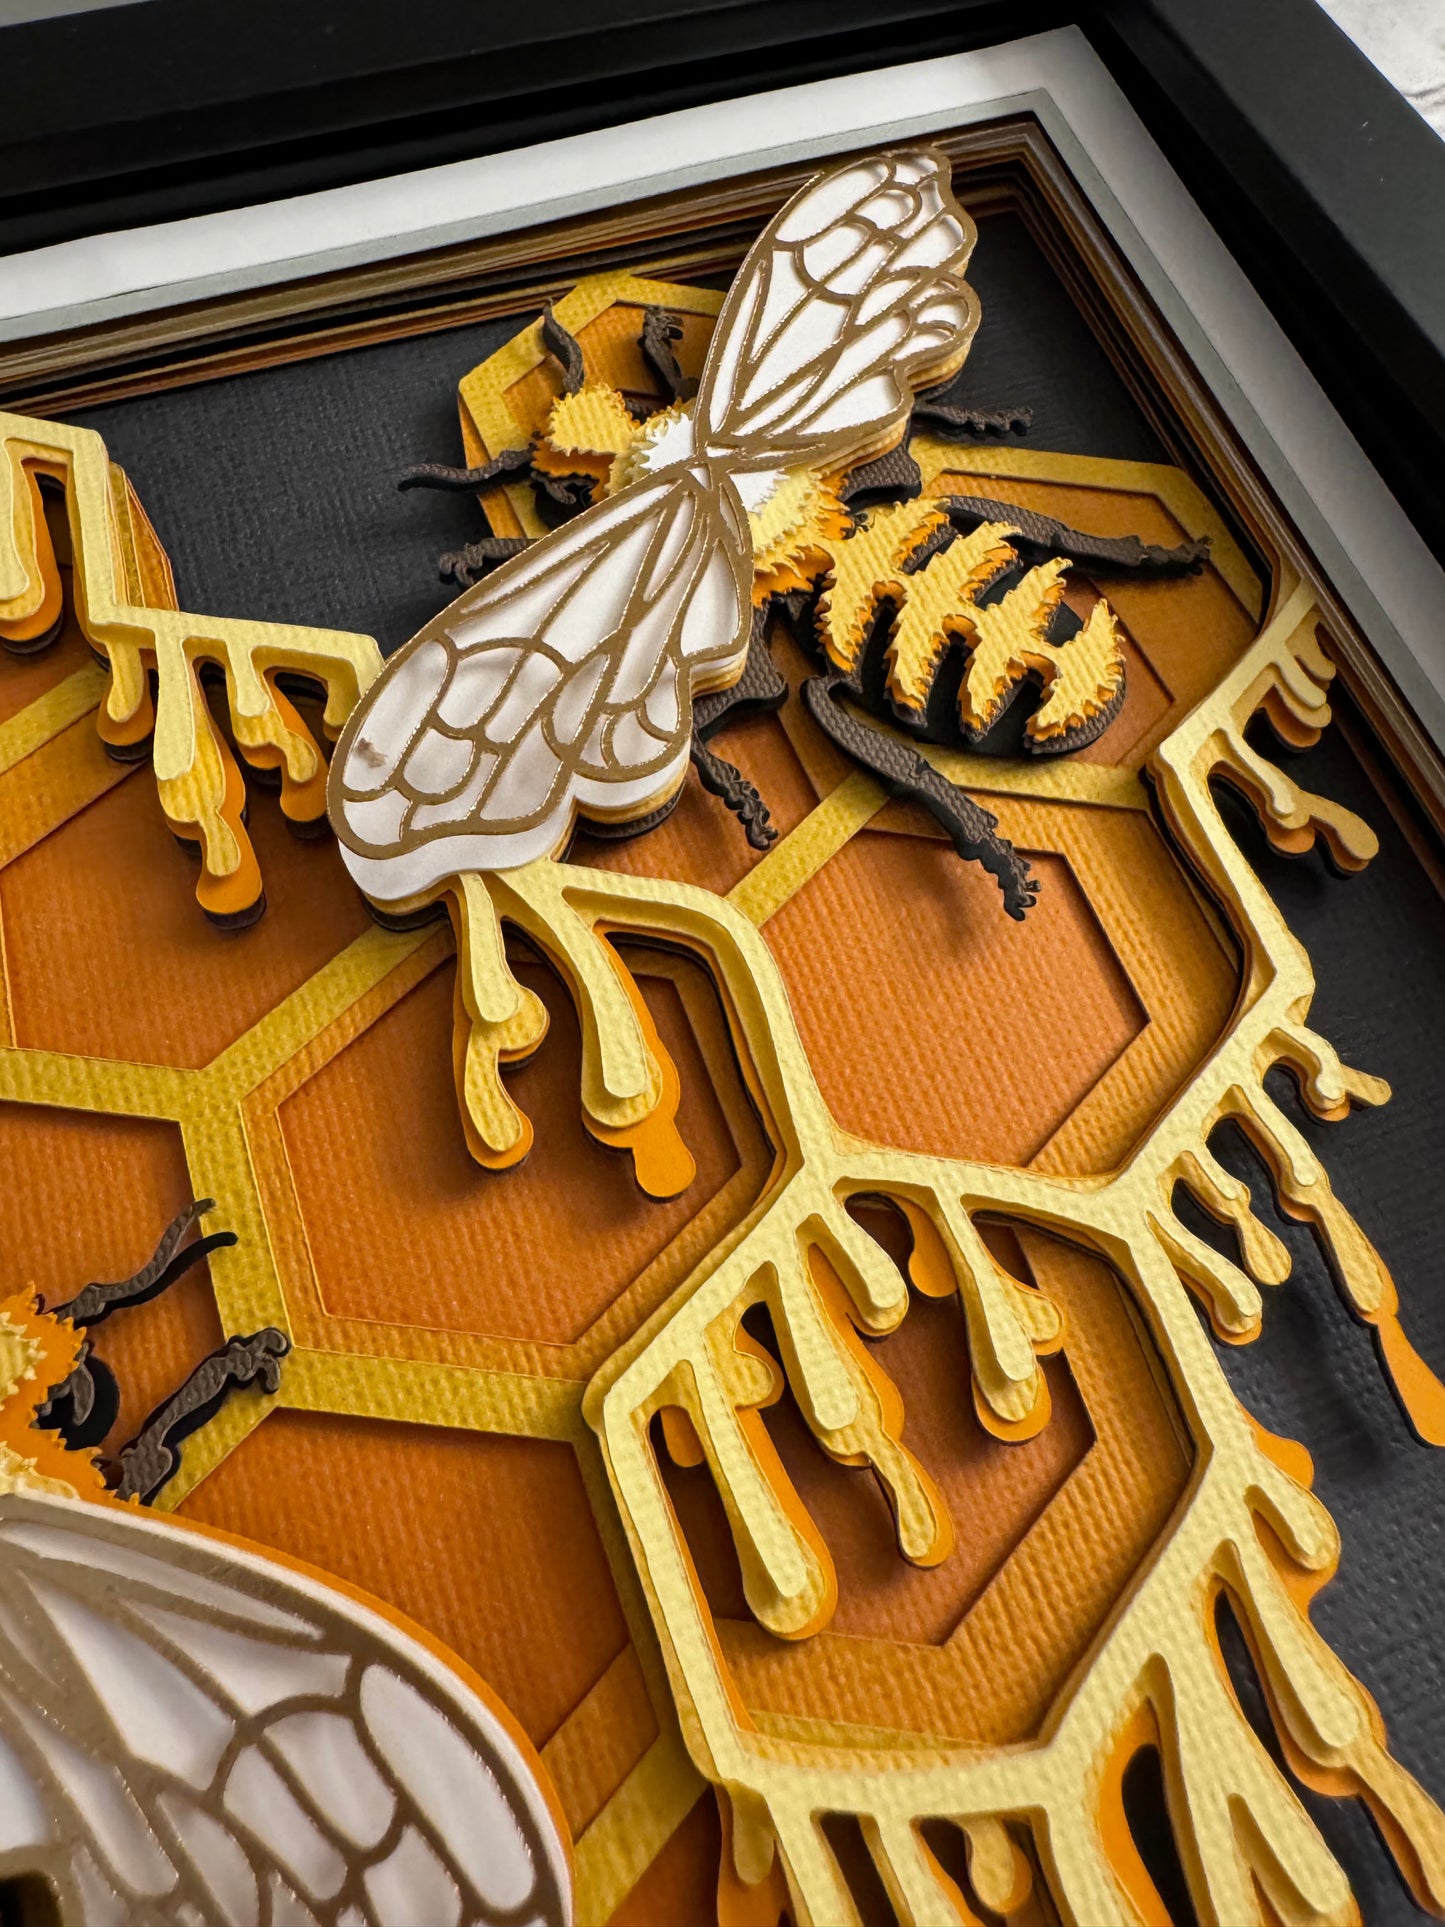 Bee scene large honeycomb with bees 3D paper art in a shadowbox